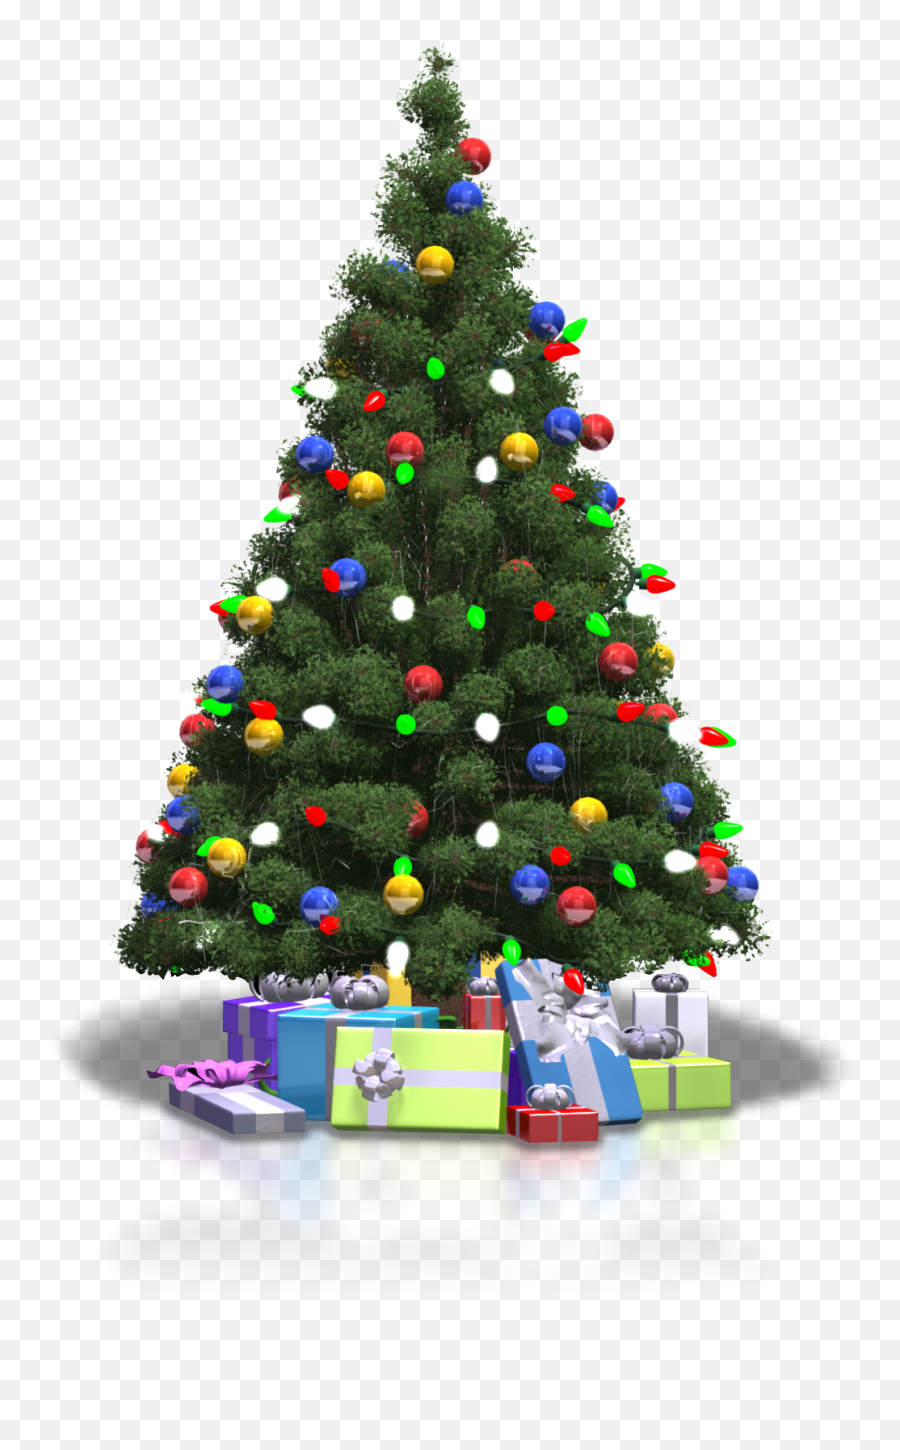 Christmas Tree Png Transparent - Star Wars Christmas Meme,Christmas Transparent